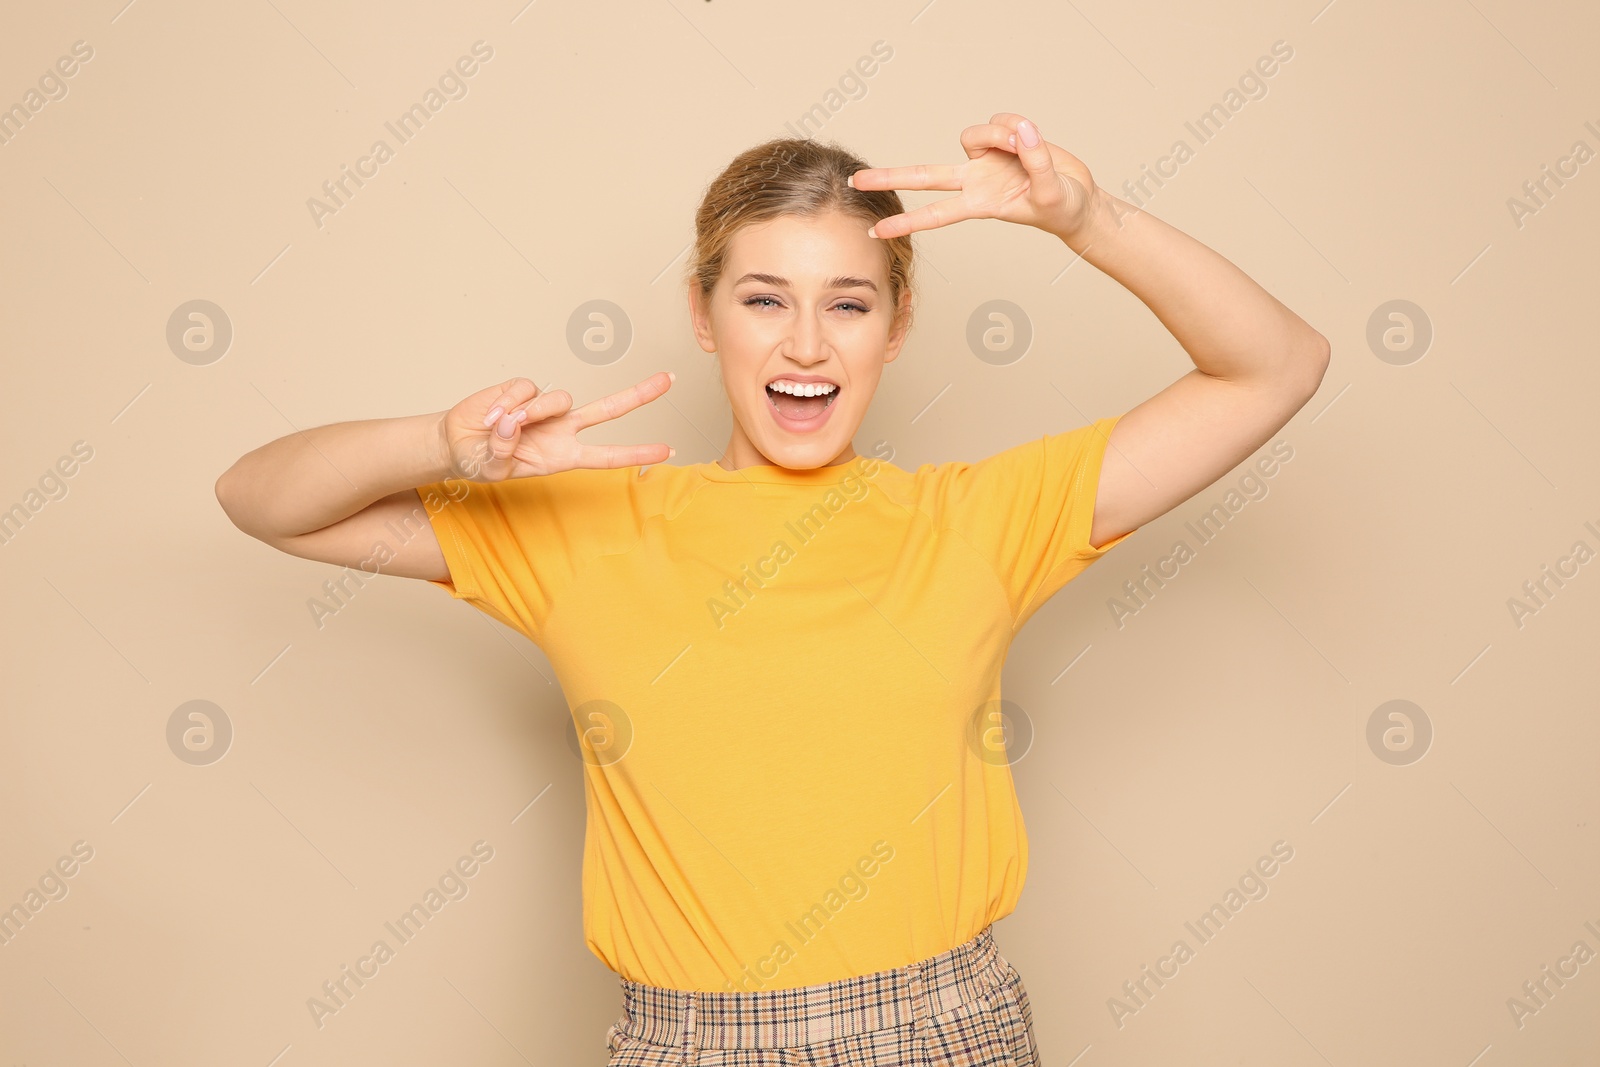 Photo of Happy young woman showing victory gesture on color background